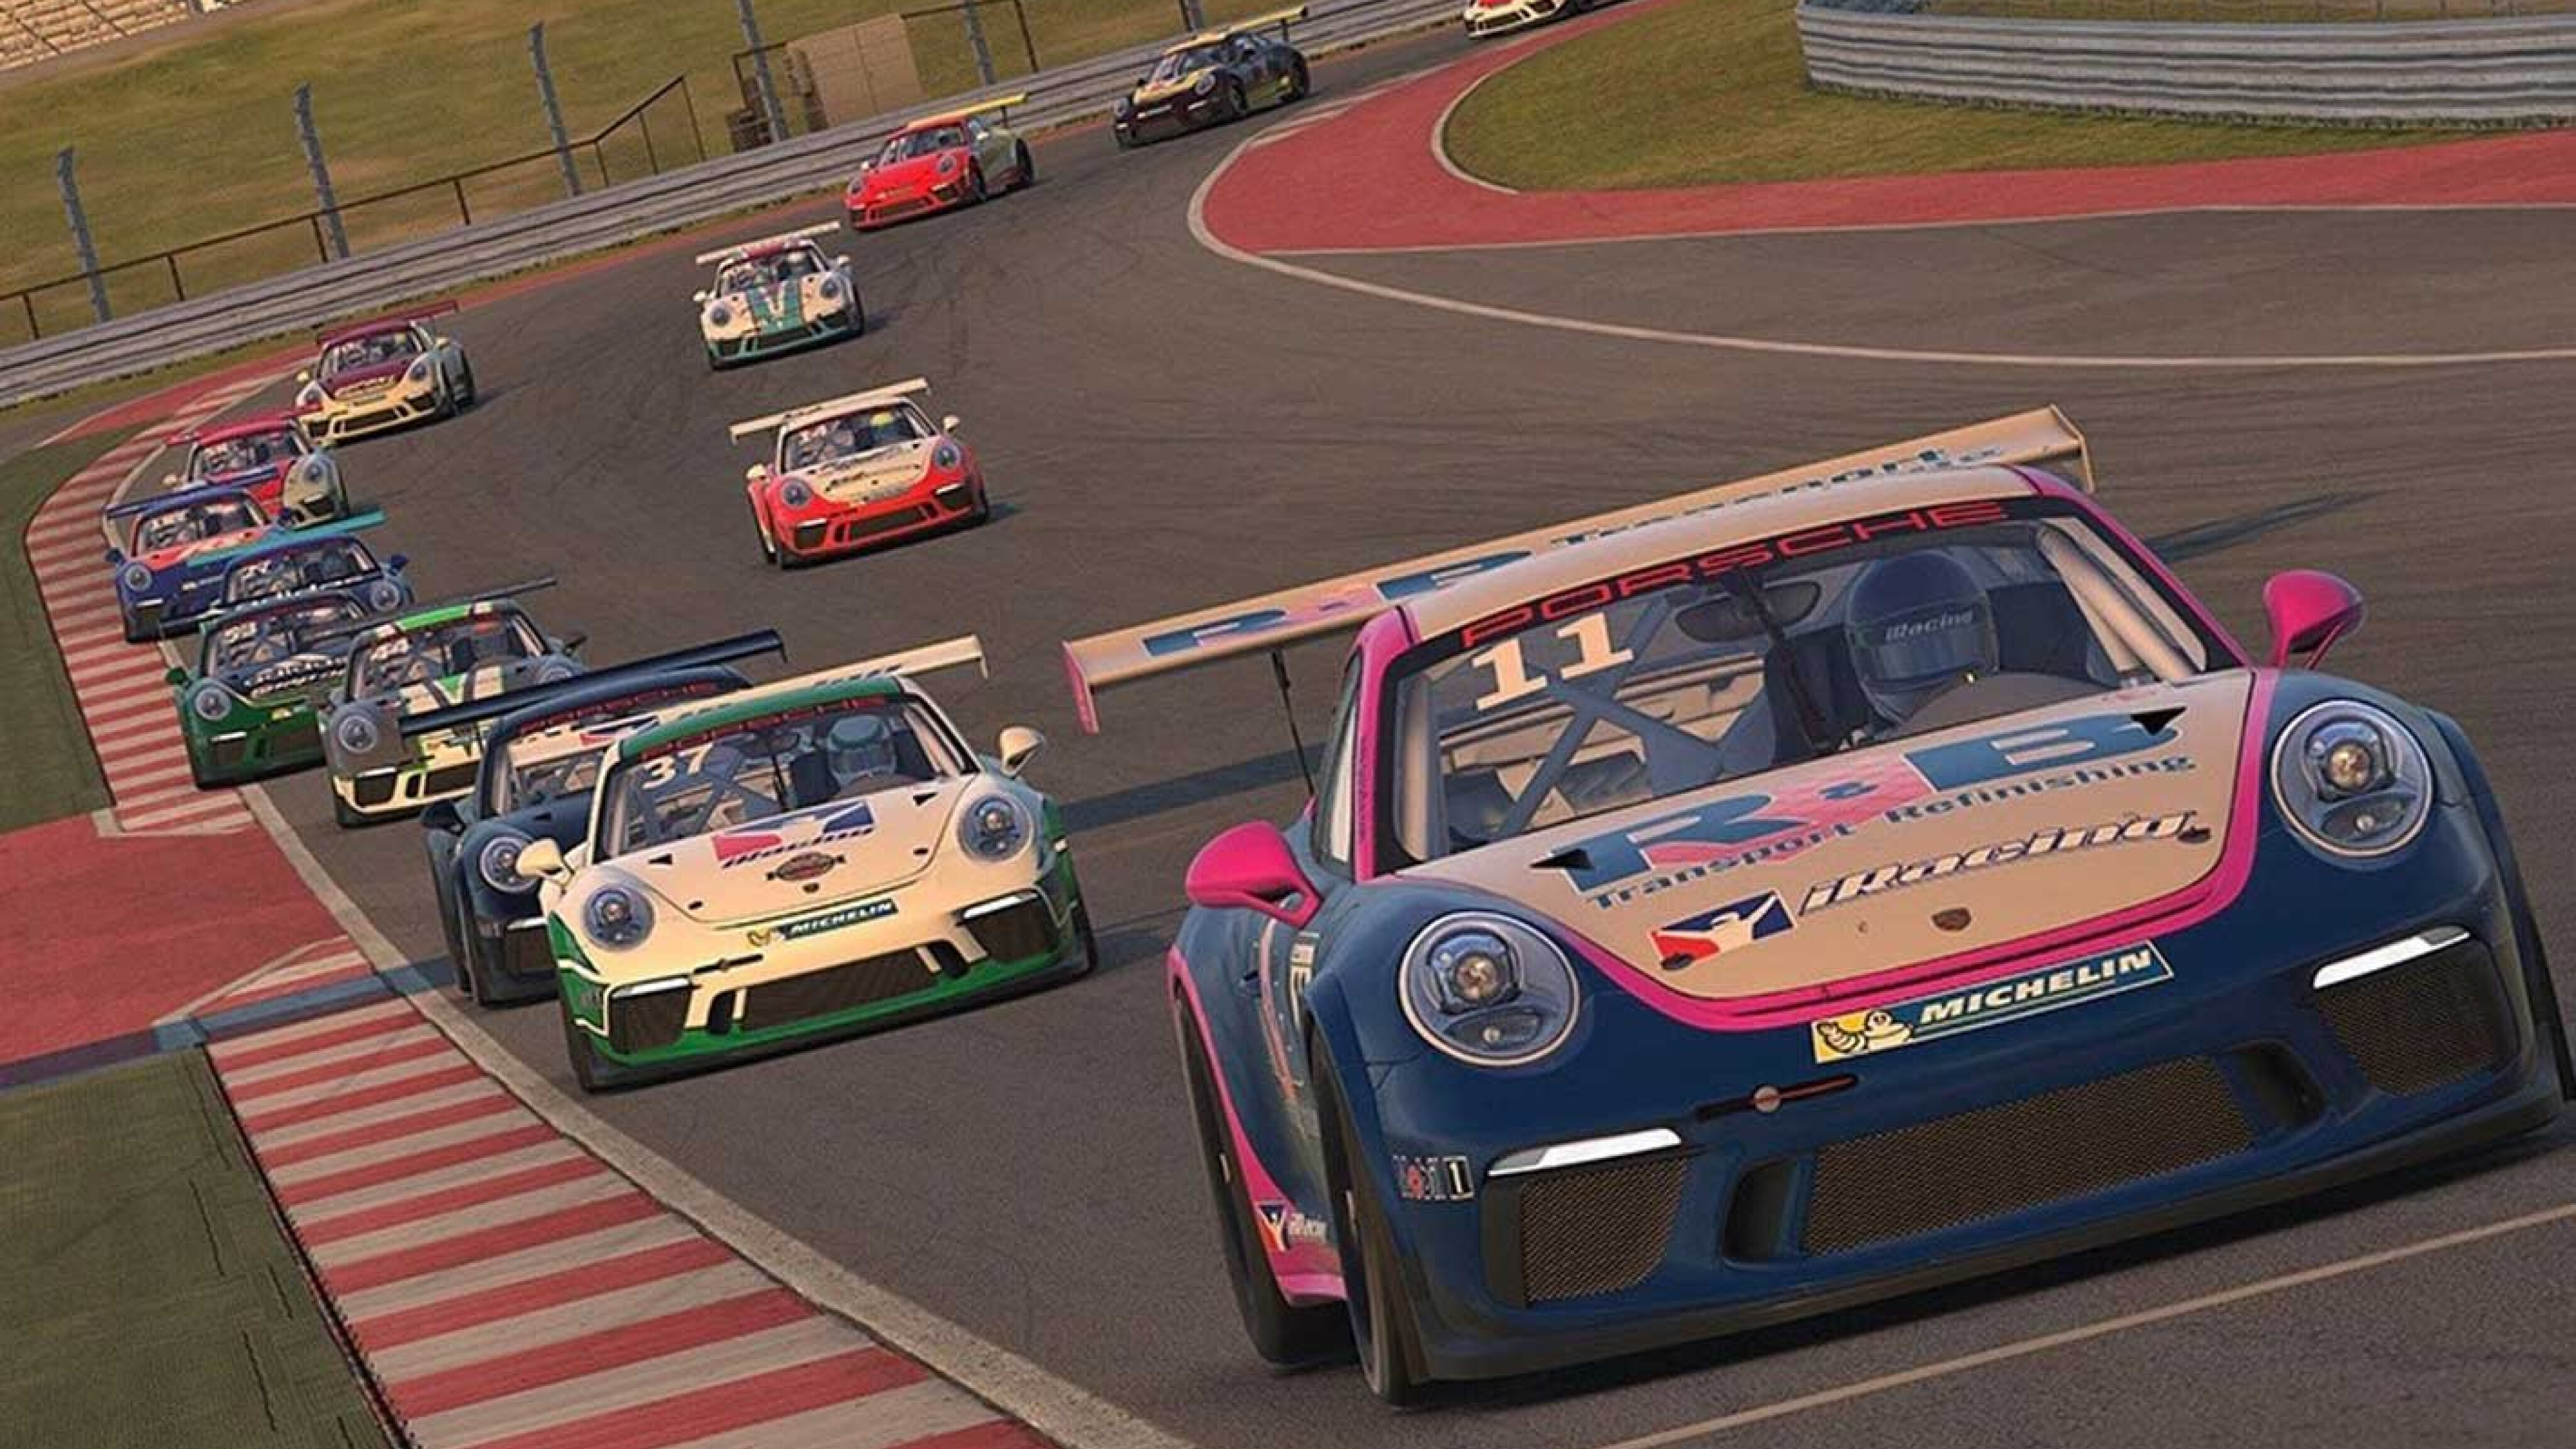 iRacing: Join Our Online eSports Sim Racing Leagues Today